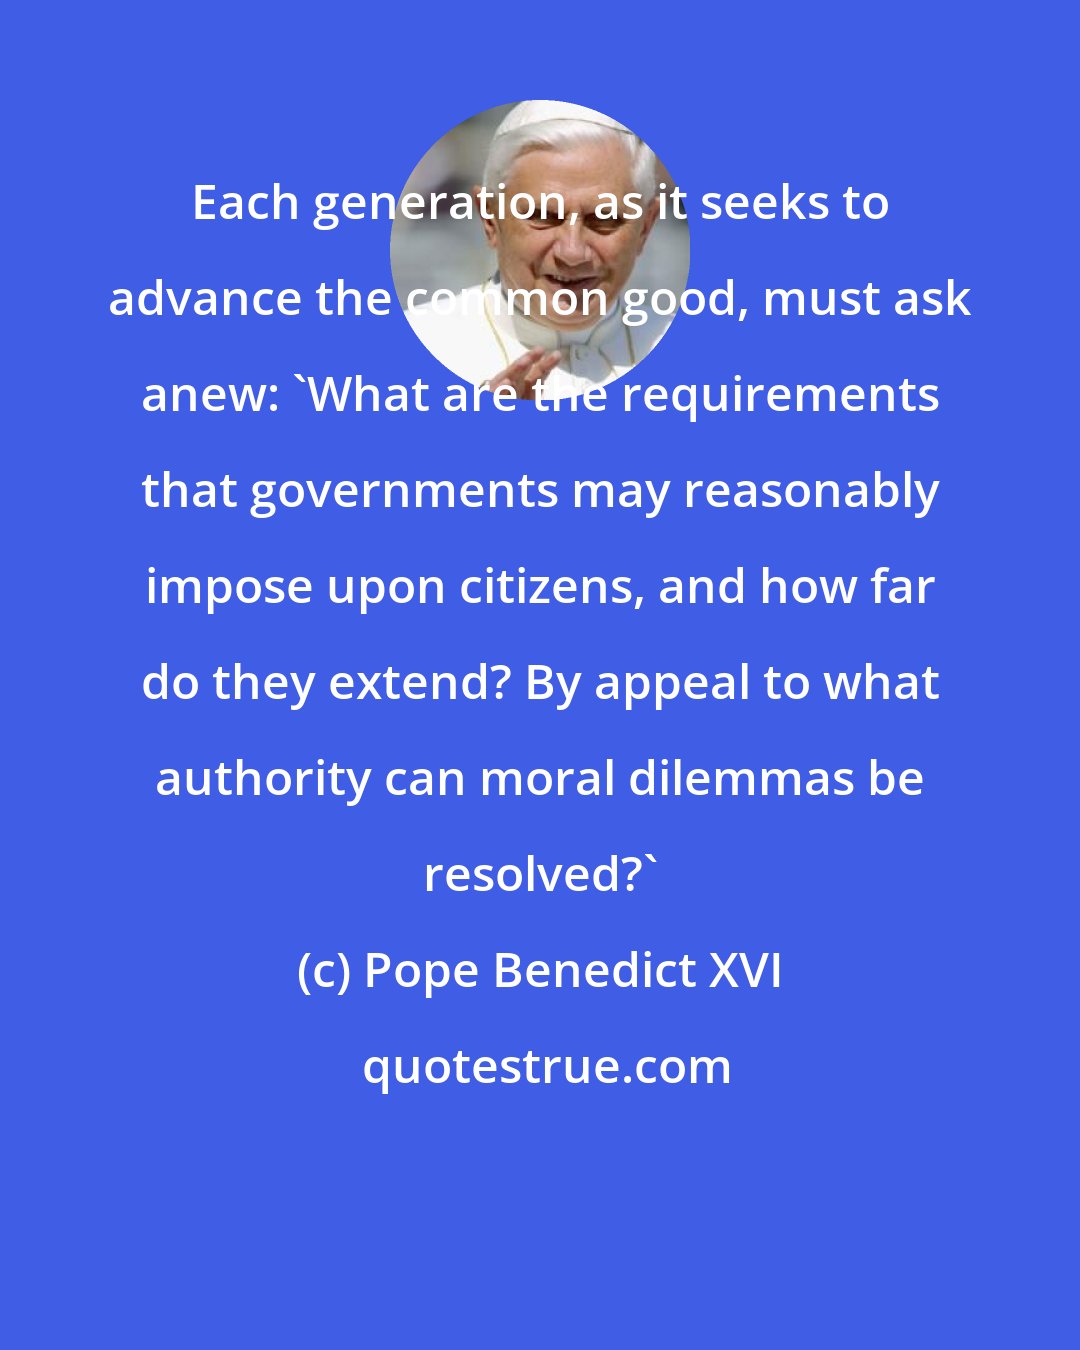 Pope Benedict XVI: Each generation, as it seeks to advance the common good, must ask anew: 'What are the requirements that governments may reasonably impose upon citizens, and how far do they extend? By appeal to what authority can moral dilemmas be resolved?'